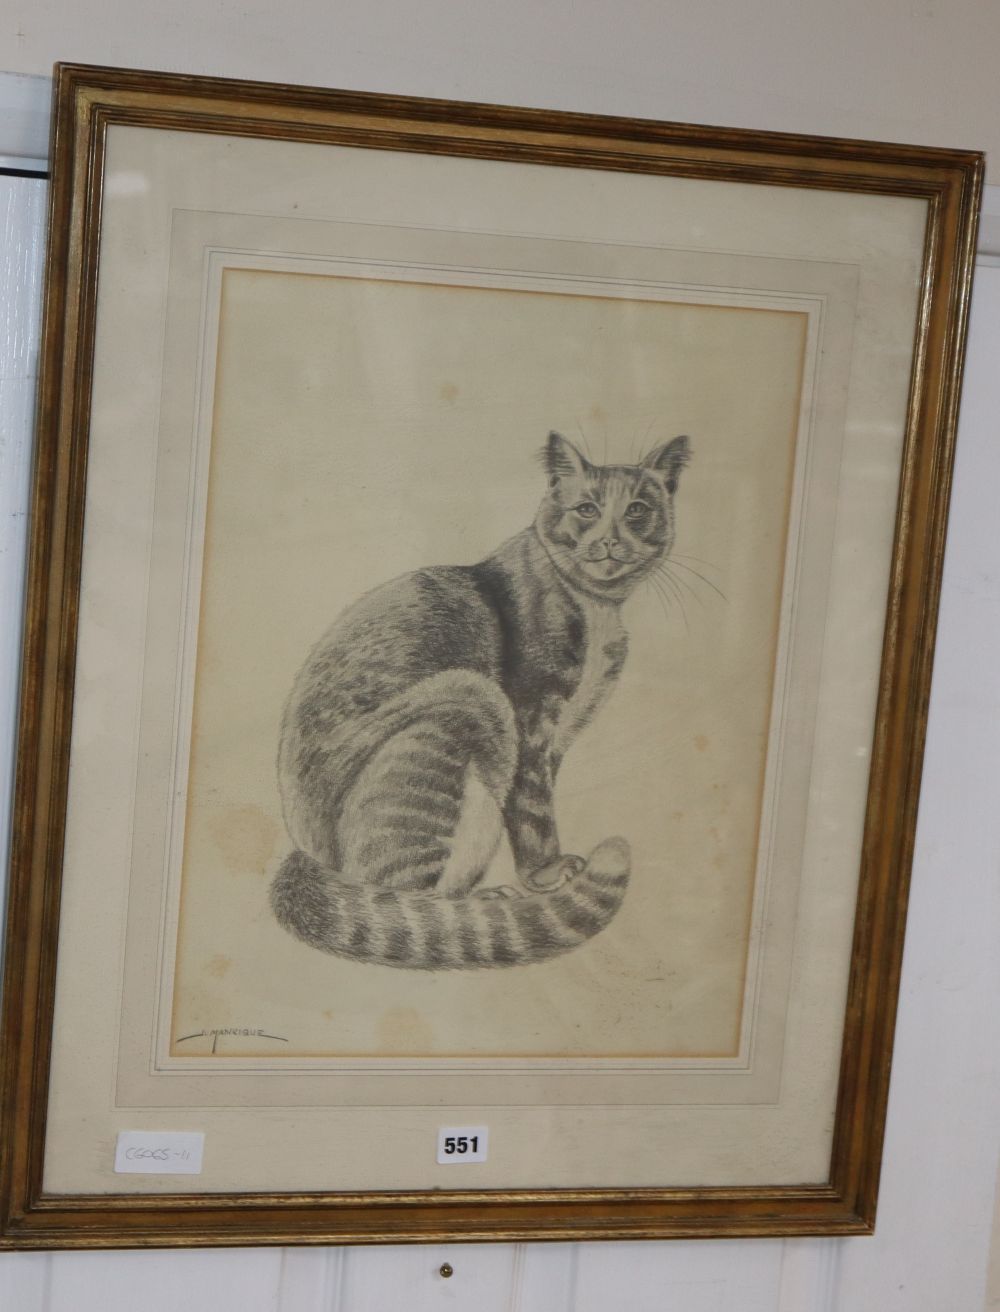 J. Manrique, pencil drawing, Study of a seated cat, signed, 45 x 35cm